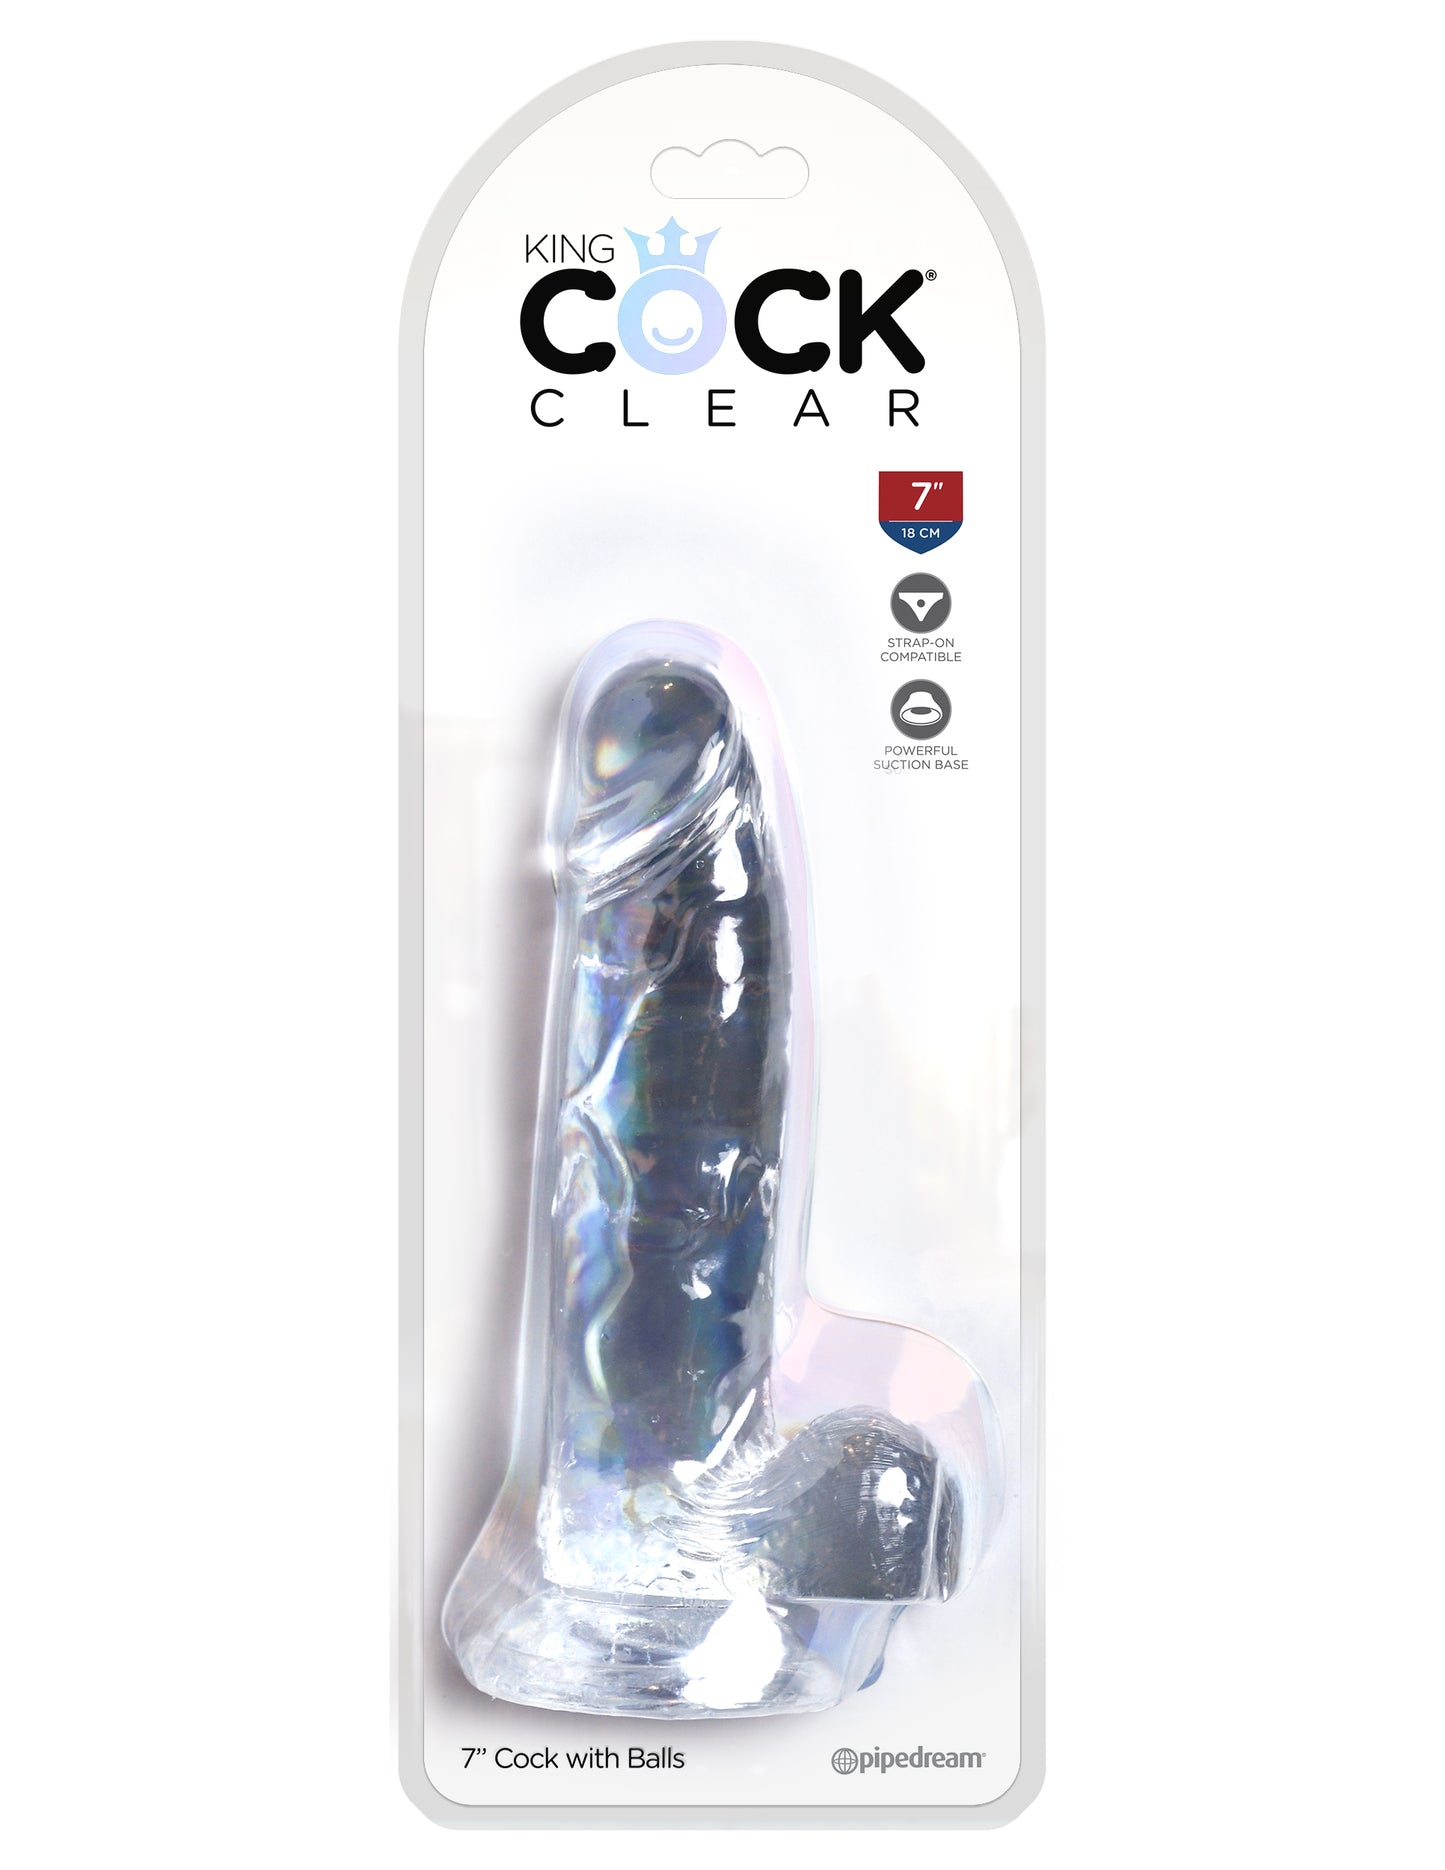 King Cock - 7 inch with balls - Clear